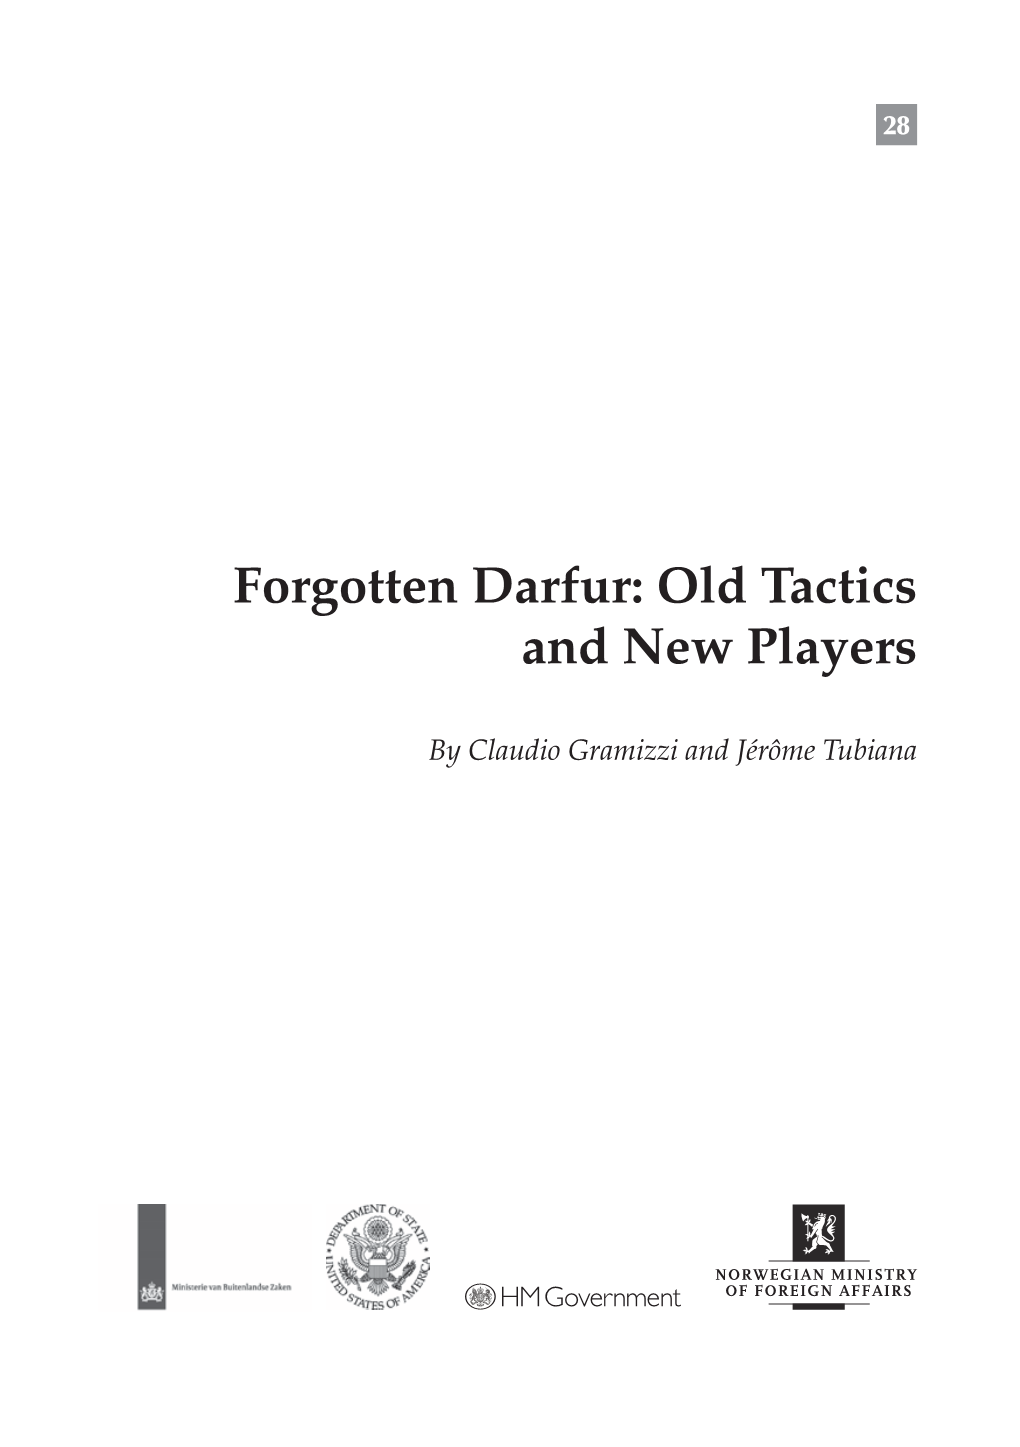 Forgotten Darfur: Old Tactics and New Players